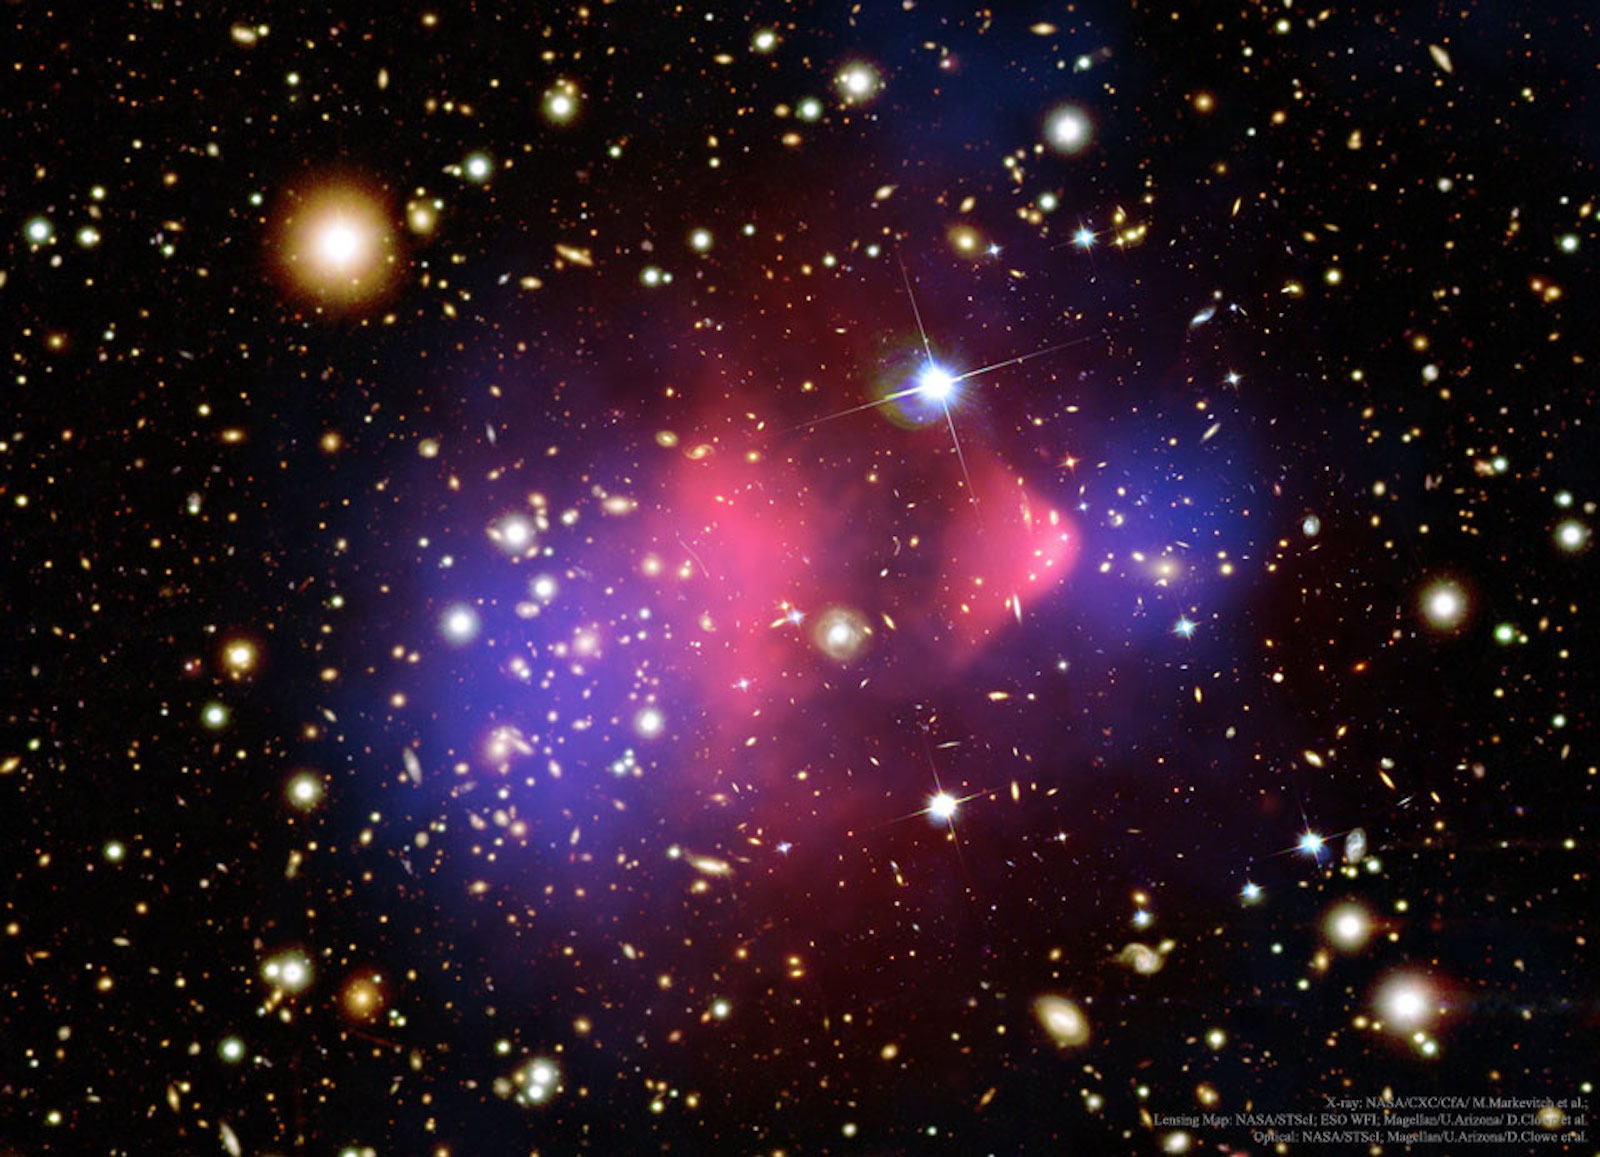 The 'Bullet Cluster' is a massive cluster of galaxies which has been interpreted as being strong evidence for the existence of dark matter